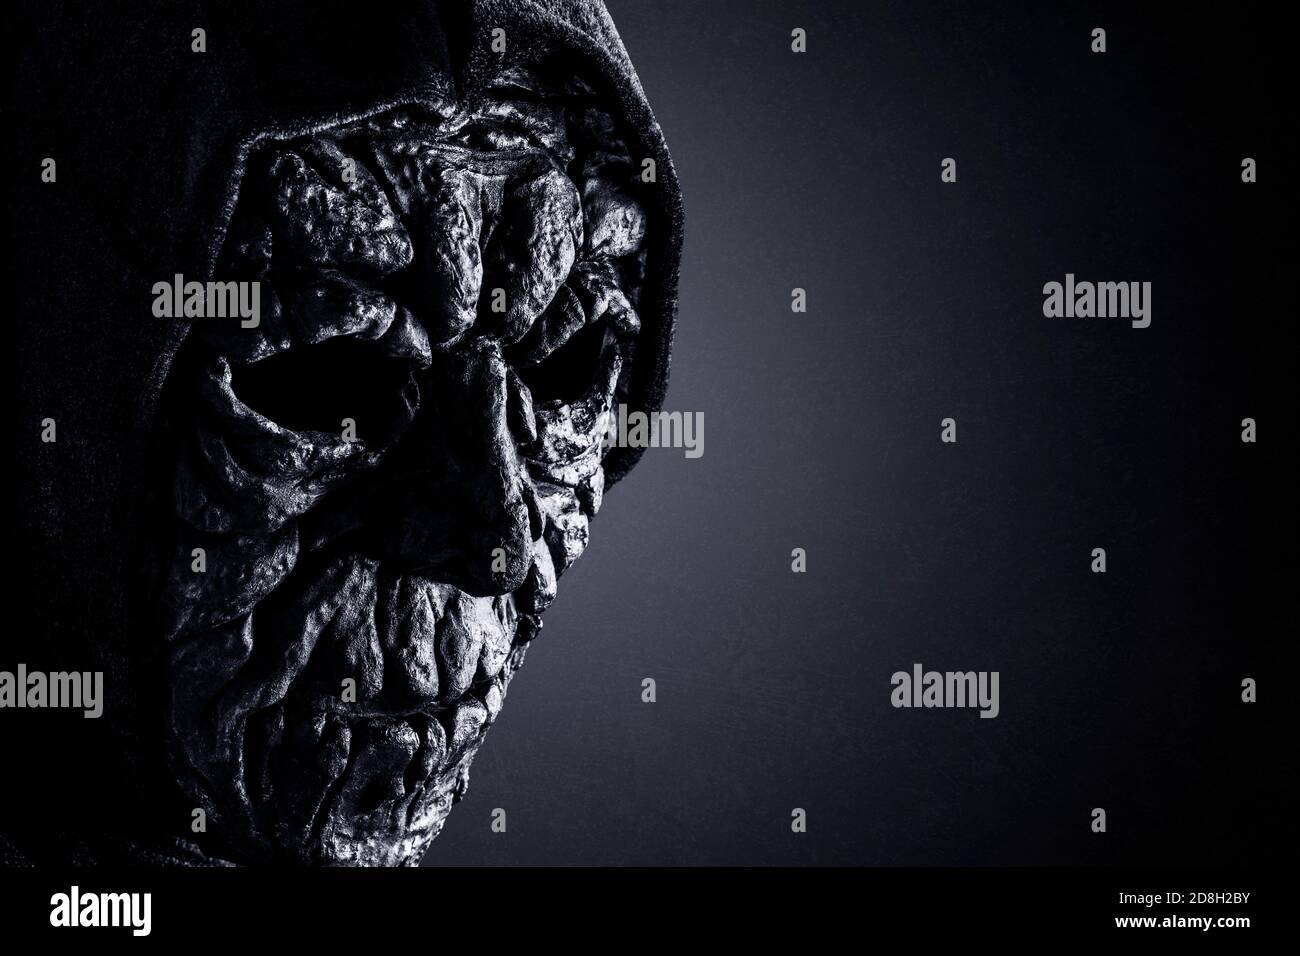 Portrait of a scary figure in hooded cloak Stock Photo